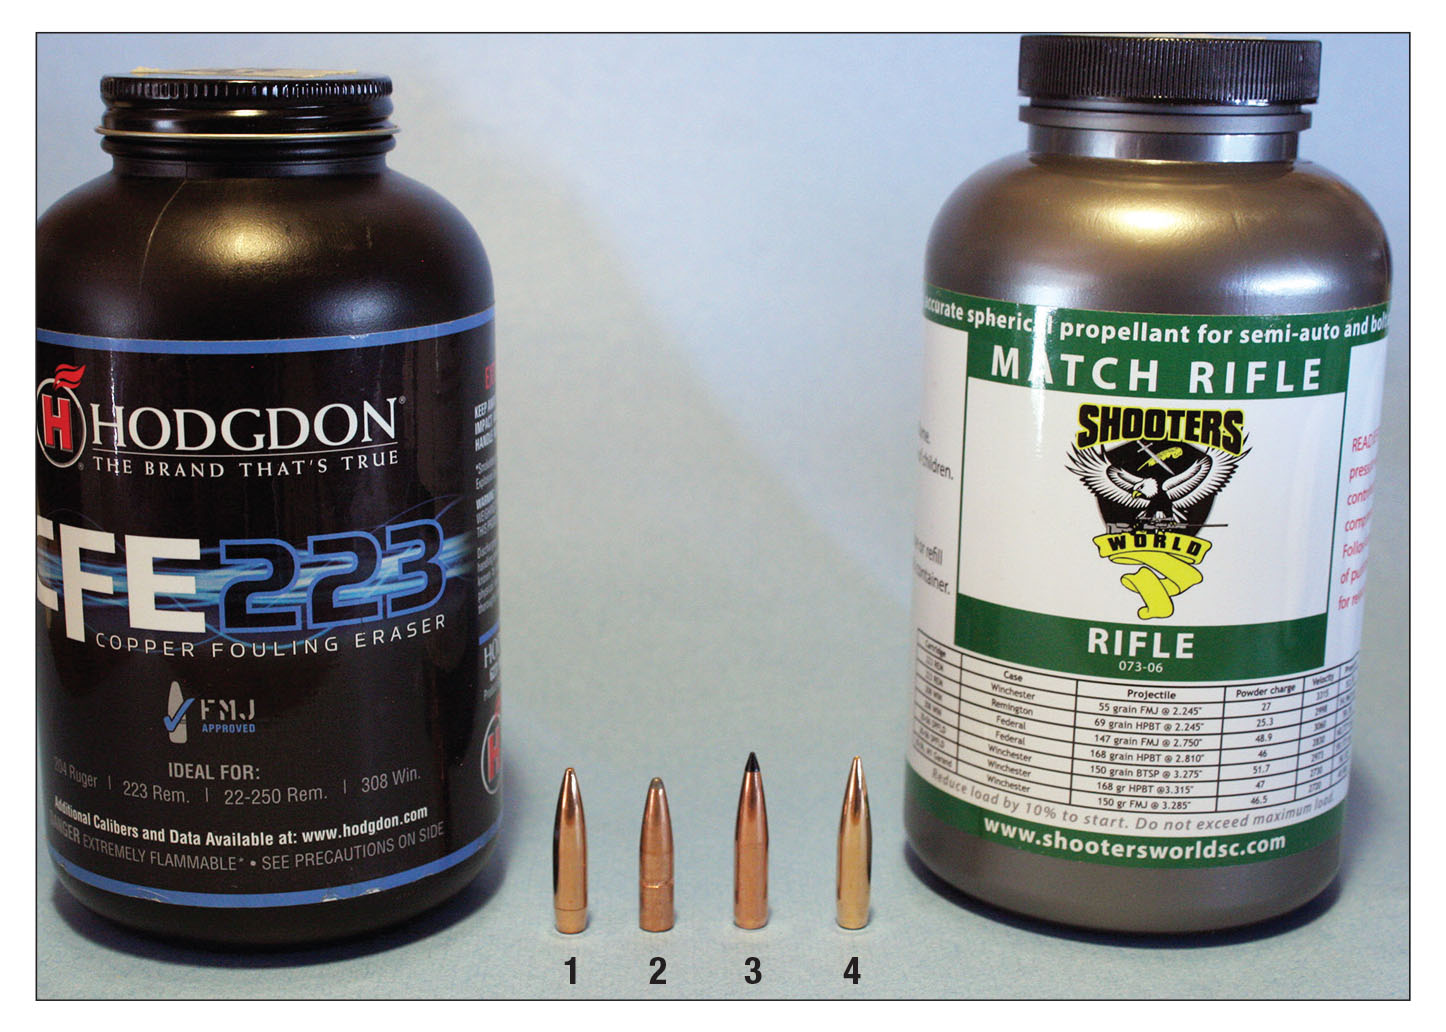 Medium-weight bullets performed best with CFE 223 and Shooters World Match Rifle. Bullets include the (1) Lapua 120-grain Scenar-L, (2) Hornady 129-grain InterLock Spire Point, (3) Swift 130 Scirocco II and (4) the Berger 130-grain AR Hybrid OTM Tactical.